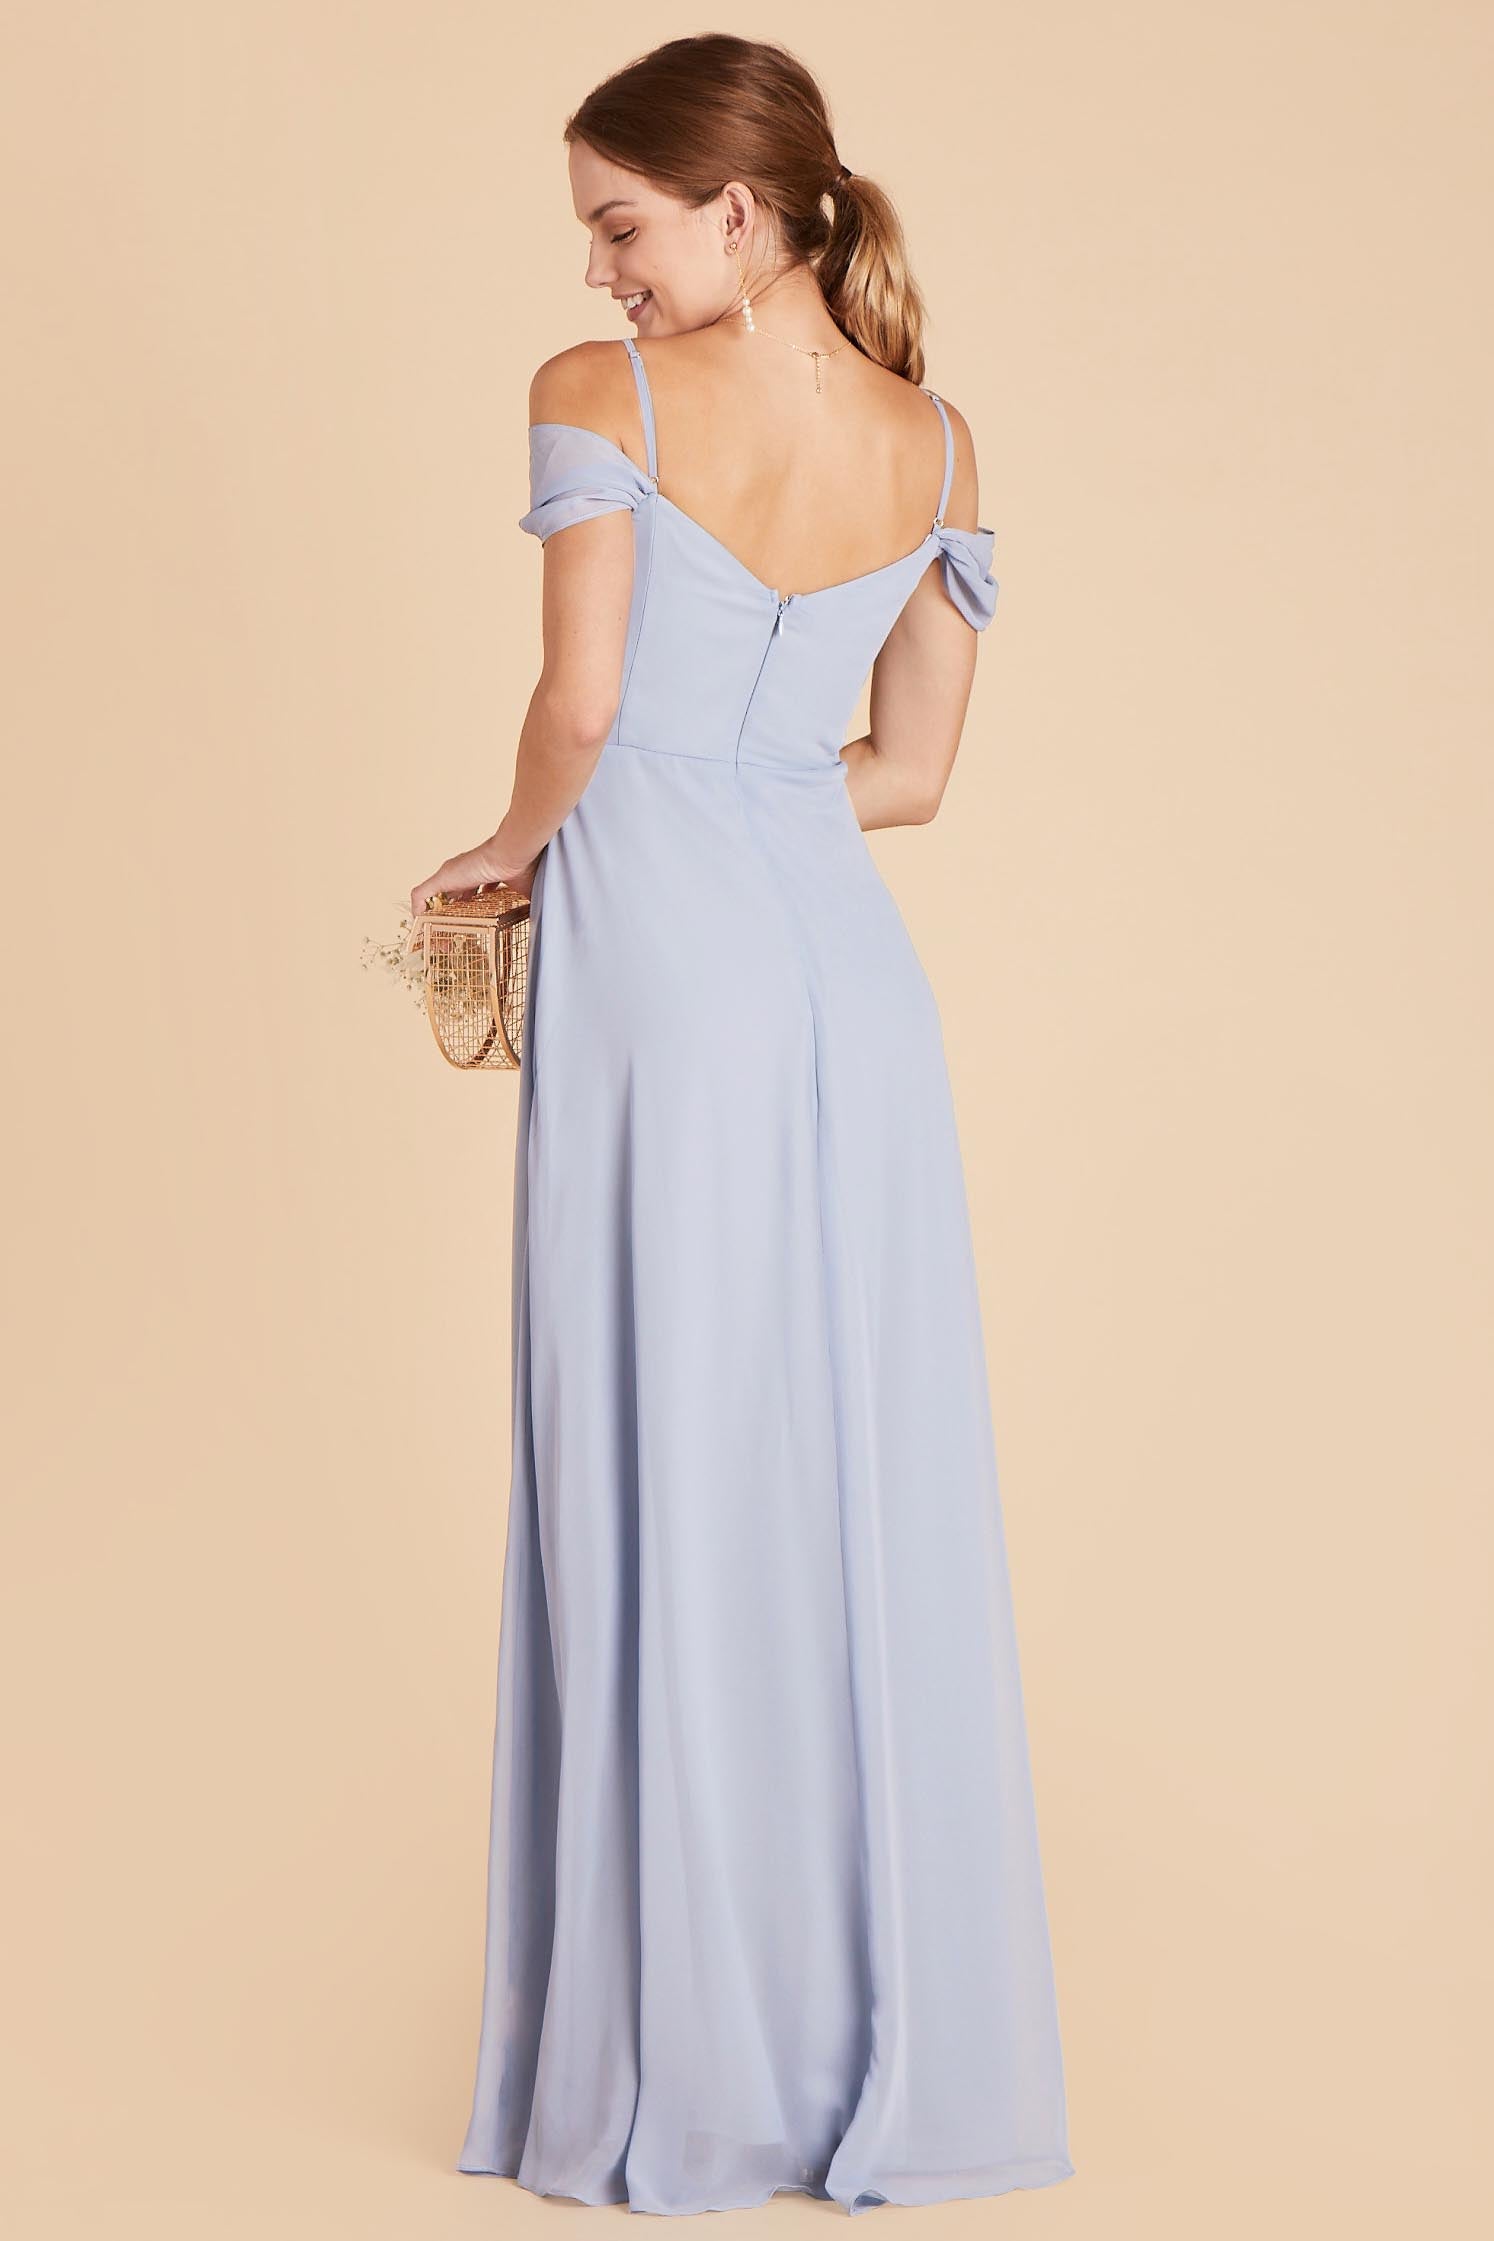 Ice Blue Spence Convertible Dress by Birdy Grey